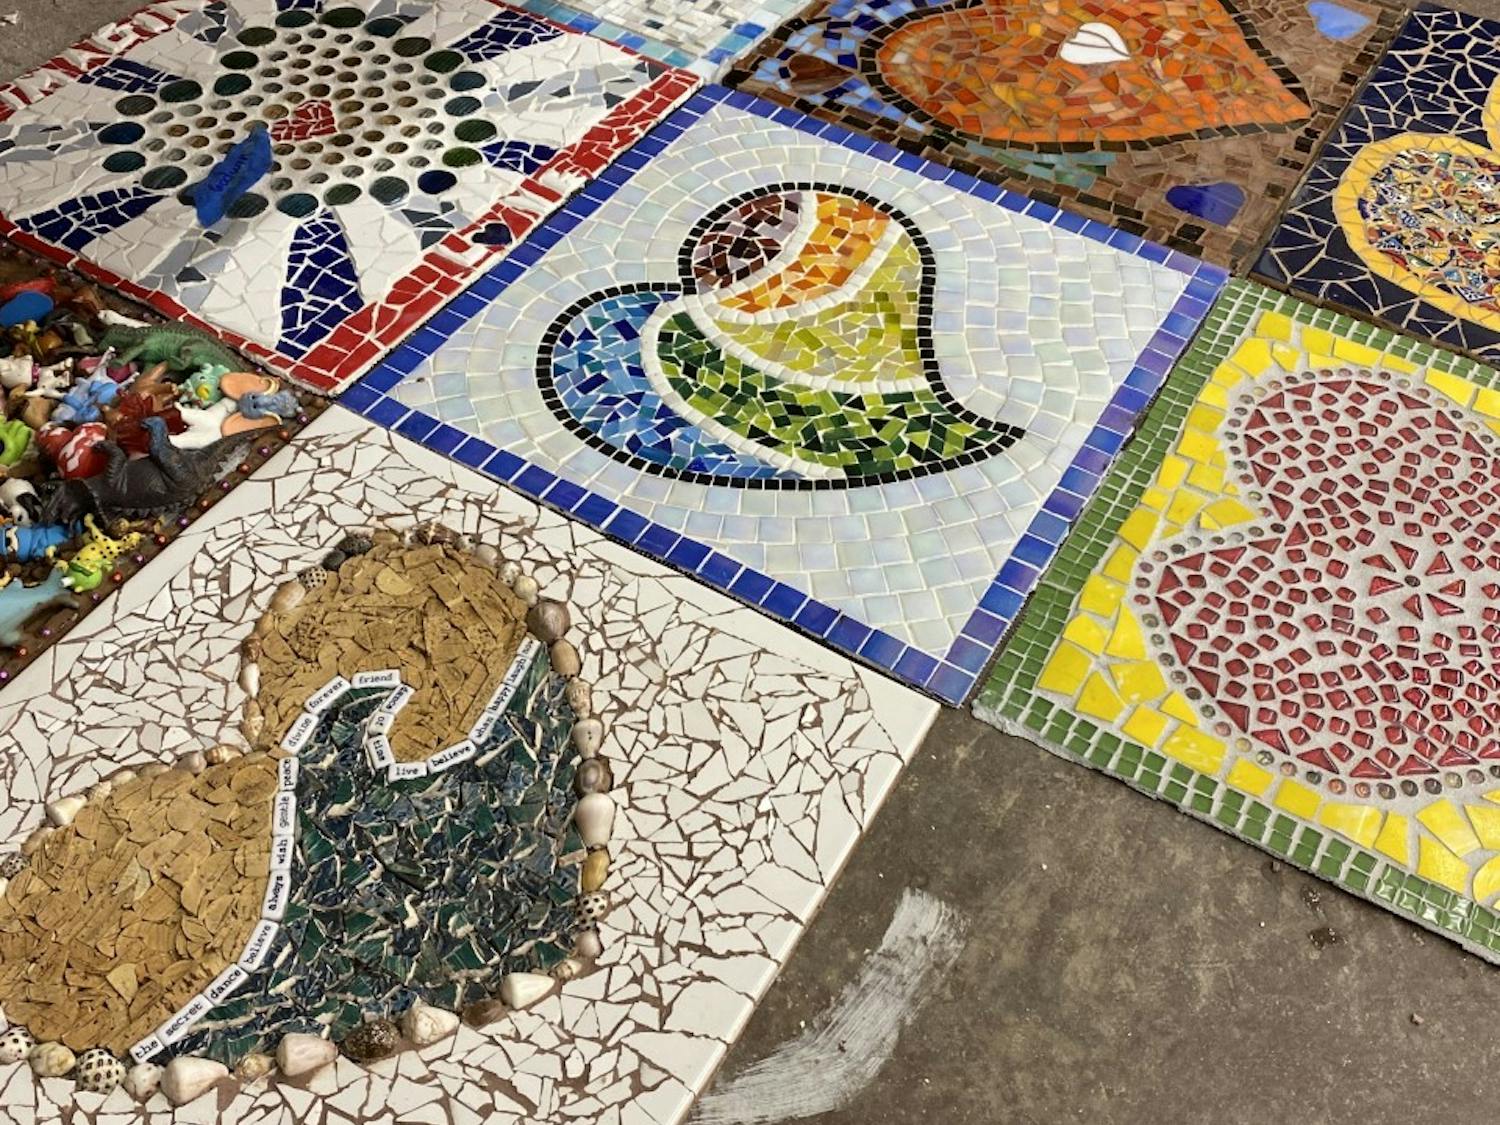 Carlos González García, a mosaicist new to the Hillsborough area, combined over 150 mosaics made by community members this summer as part of the #LoveHillsborough Community Art Project. Photo courtesy of Carlos González García.&nbsp;